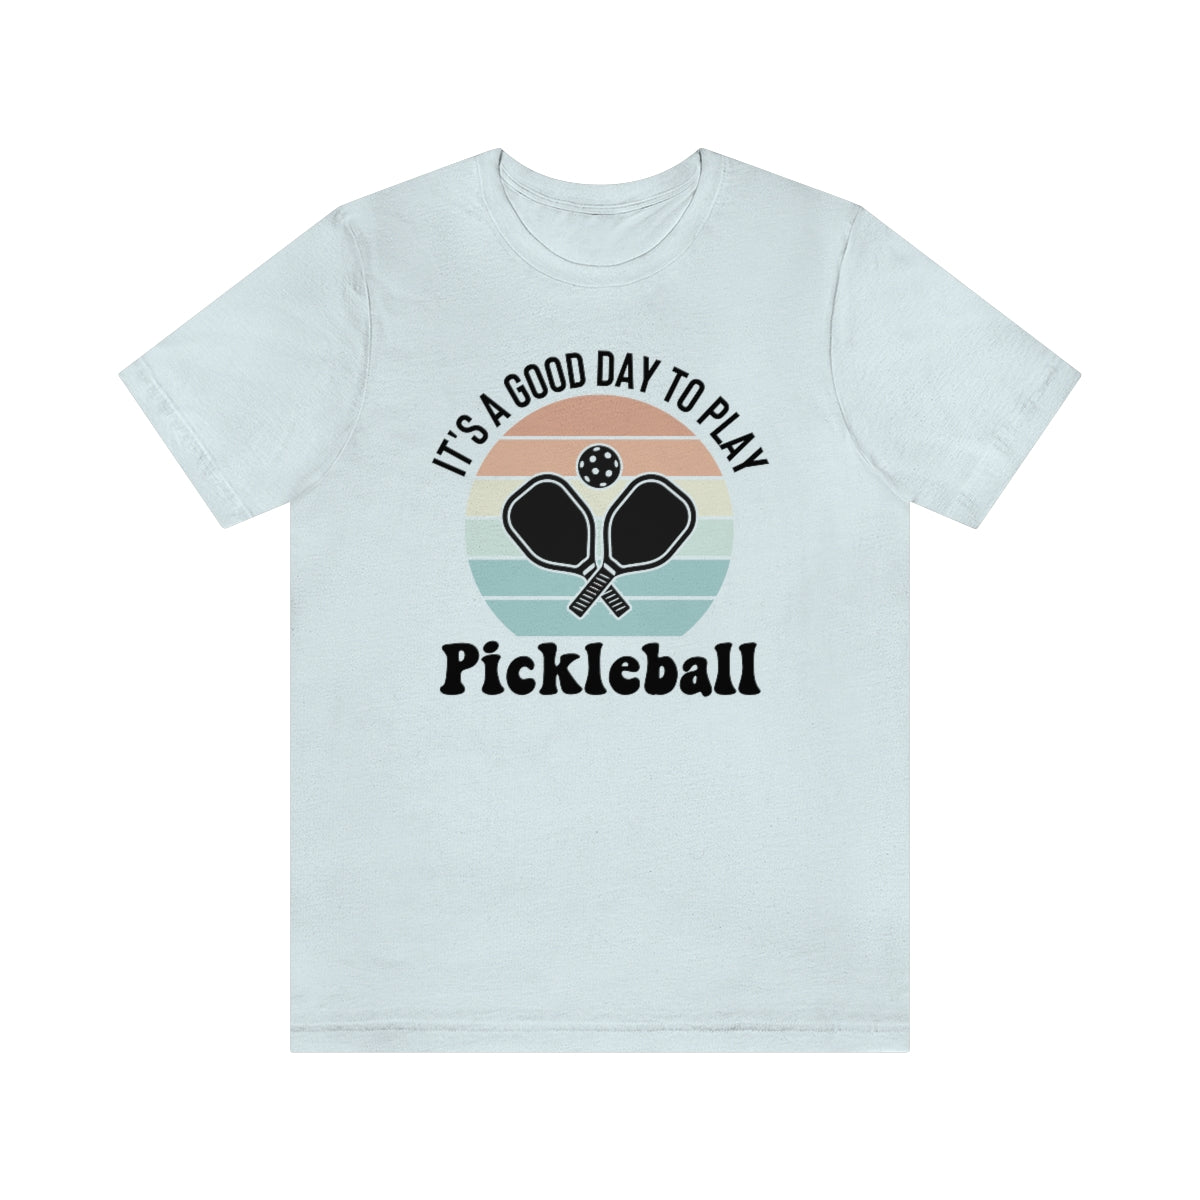 It's A Good Day To Play Pickleball Retro Sunset Shirt